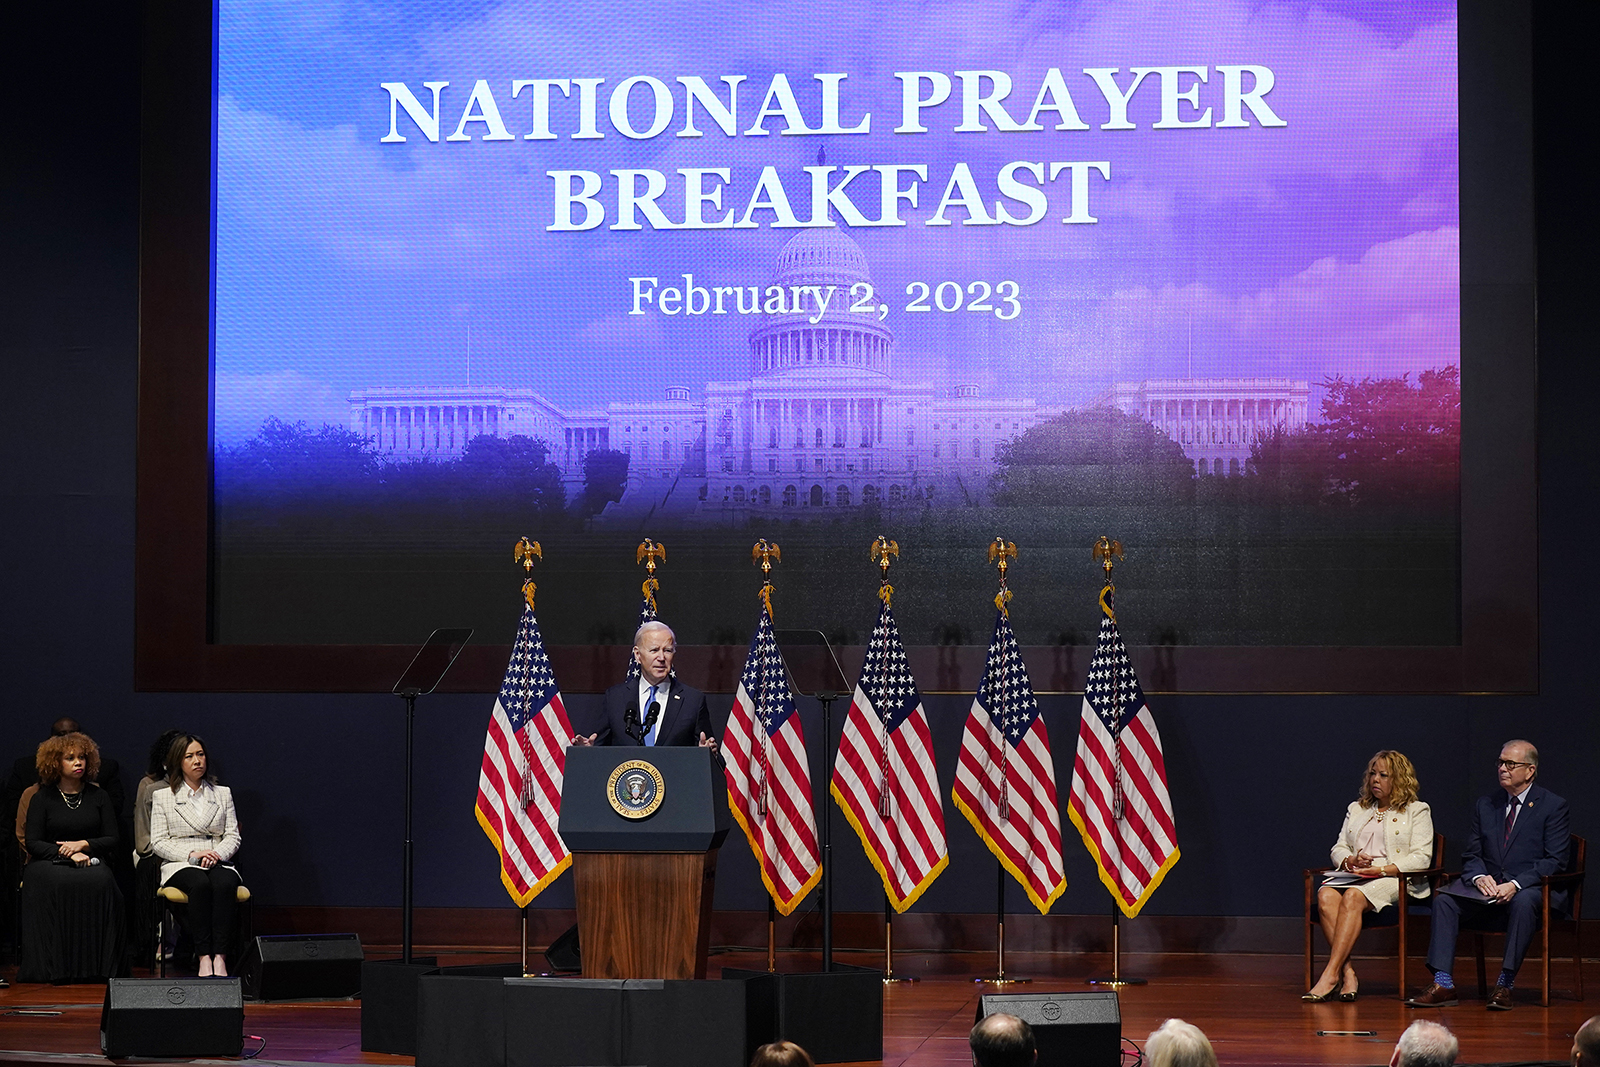 Biden tells dueling prayer breakfasts that ‘diversity is one of our greatest strengths’